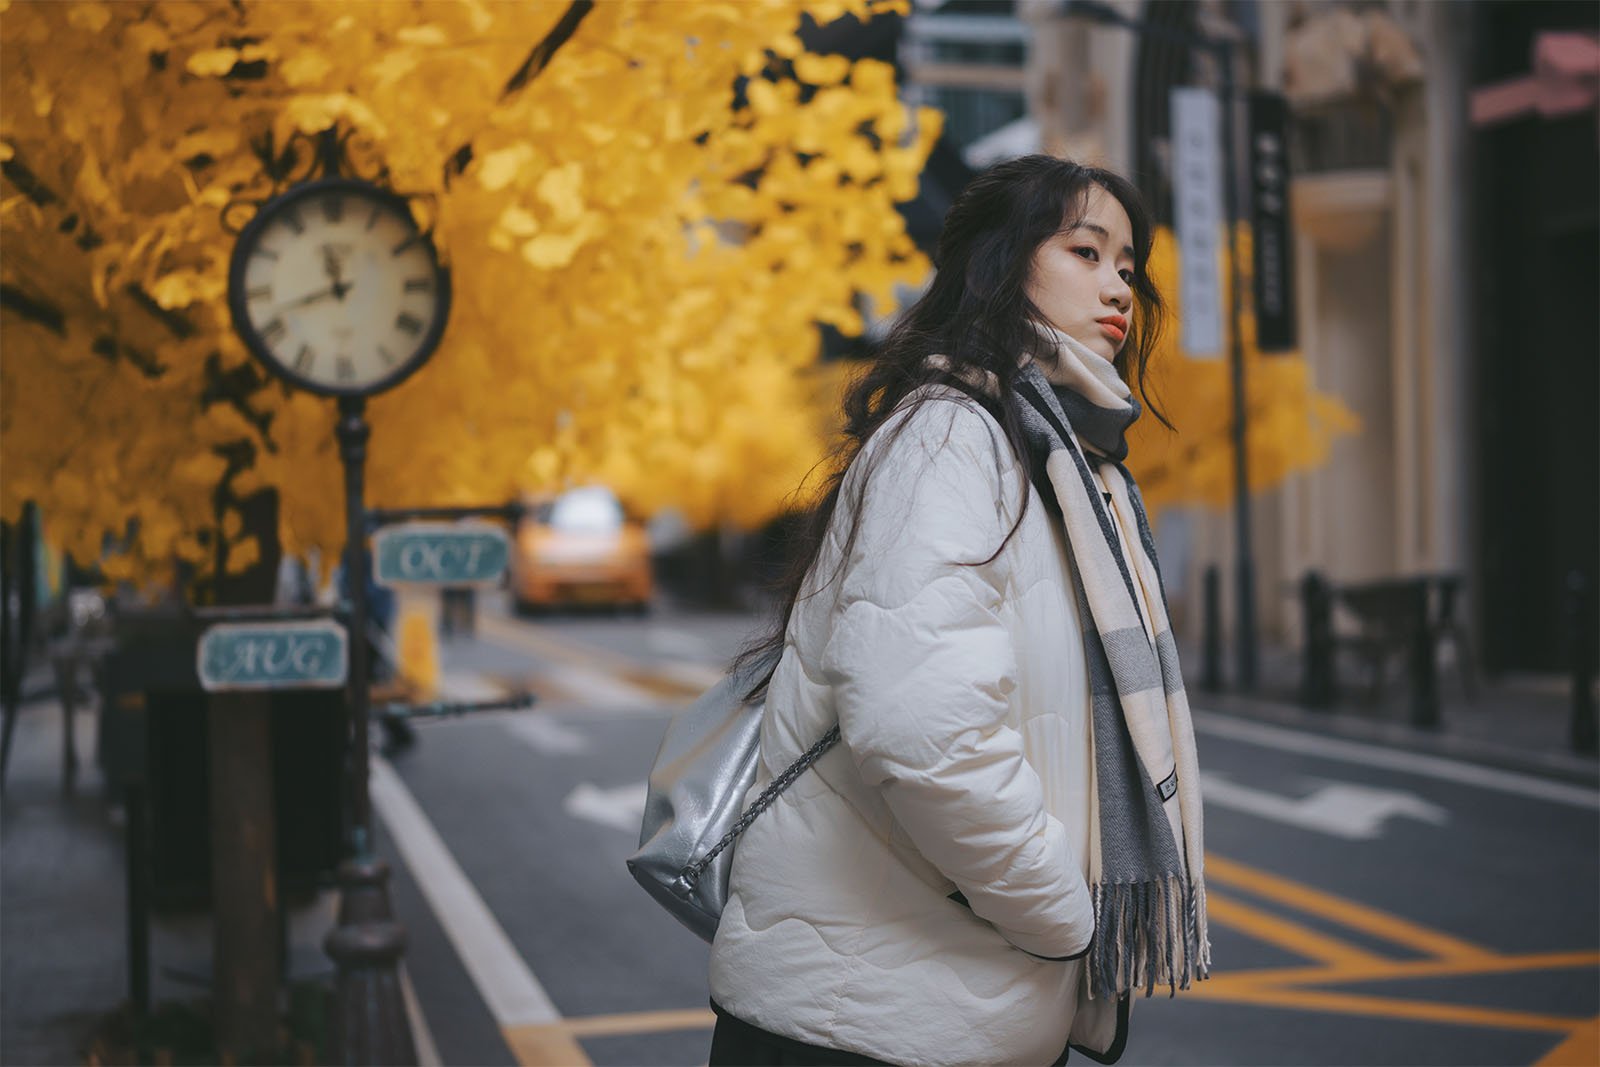 A woman in a white jacket and gray scarf stands by a street, with vibrant yellow autumn trees on one side and a blurry view of a taxi and street clock in the background.